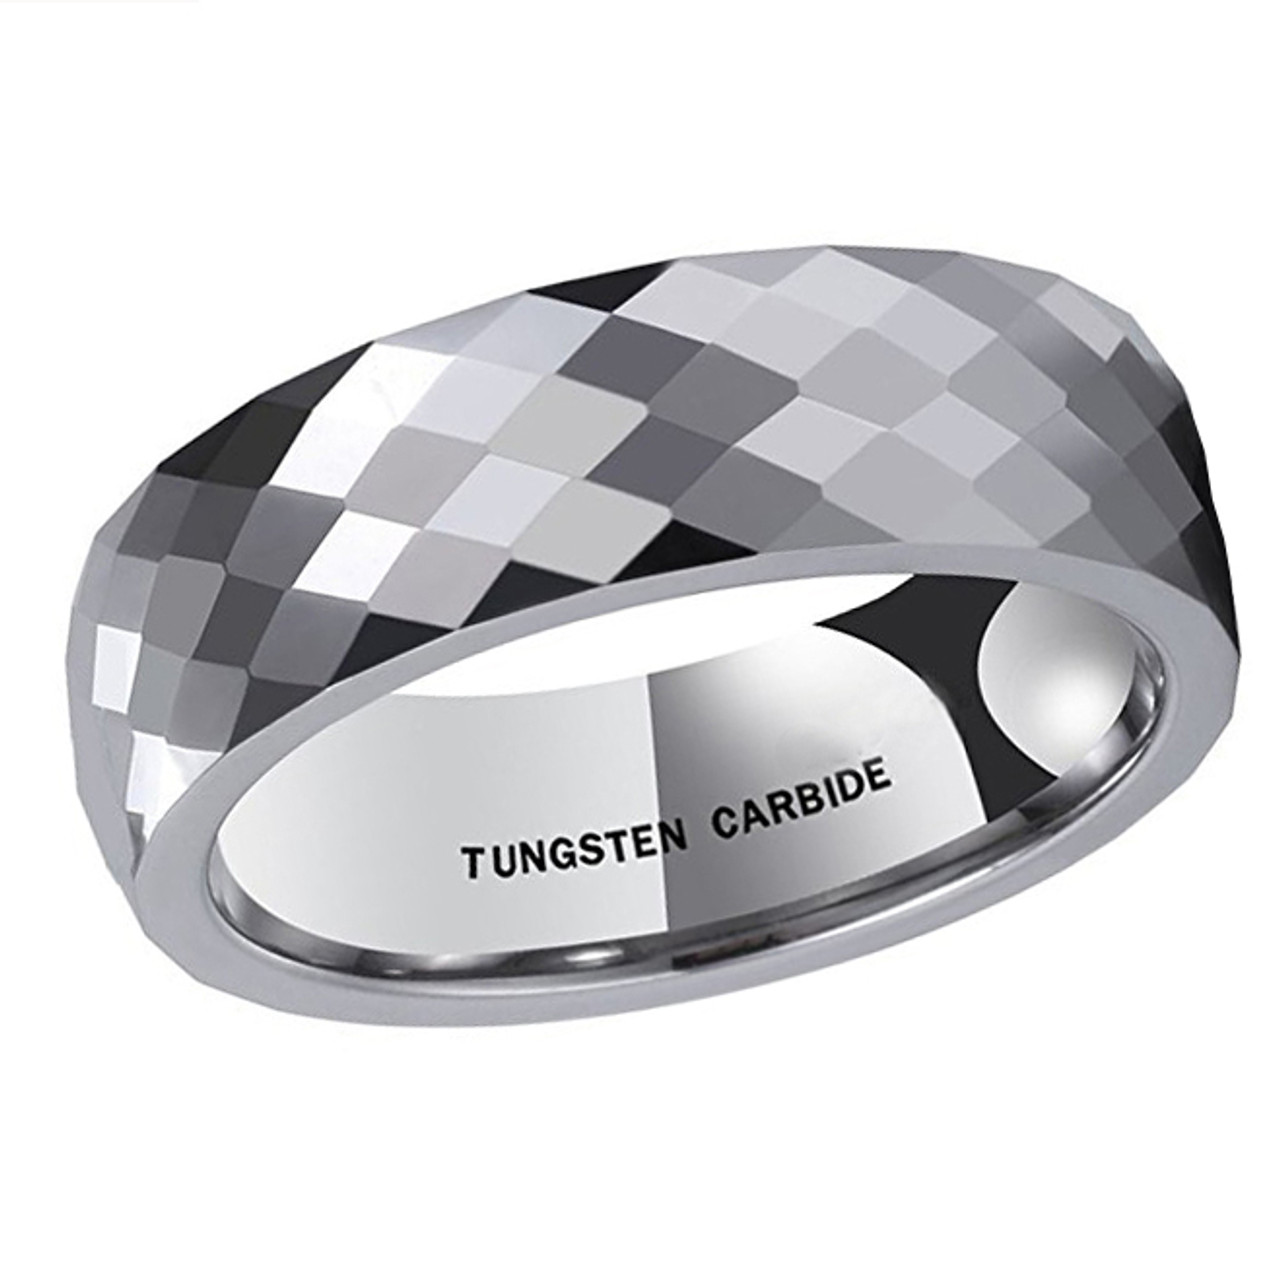 (8mm) Unisex or Men's Tungsten Carbide Wedding Ring Band. Silver Tone Diamond Faceted High Polish Domed Top Ring.